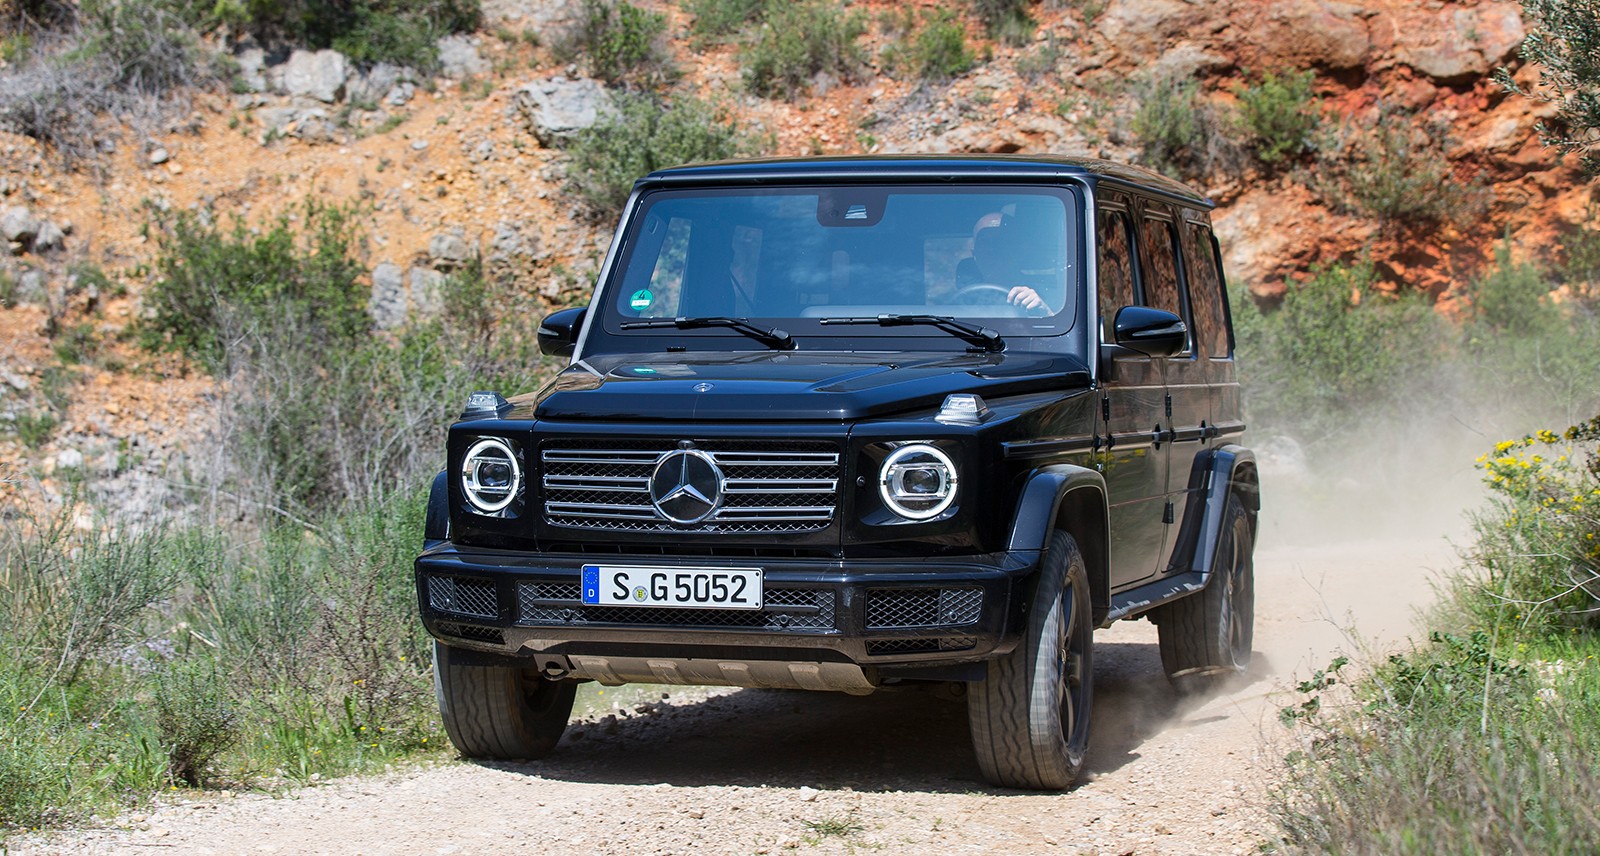 The Best Thing About the All-New Mercedes G-Class Is It's Exactly the Same as the Old One